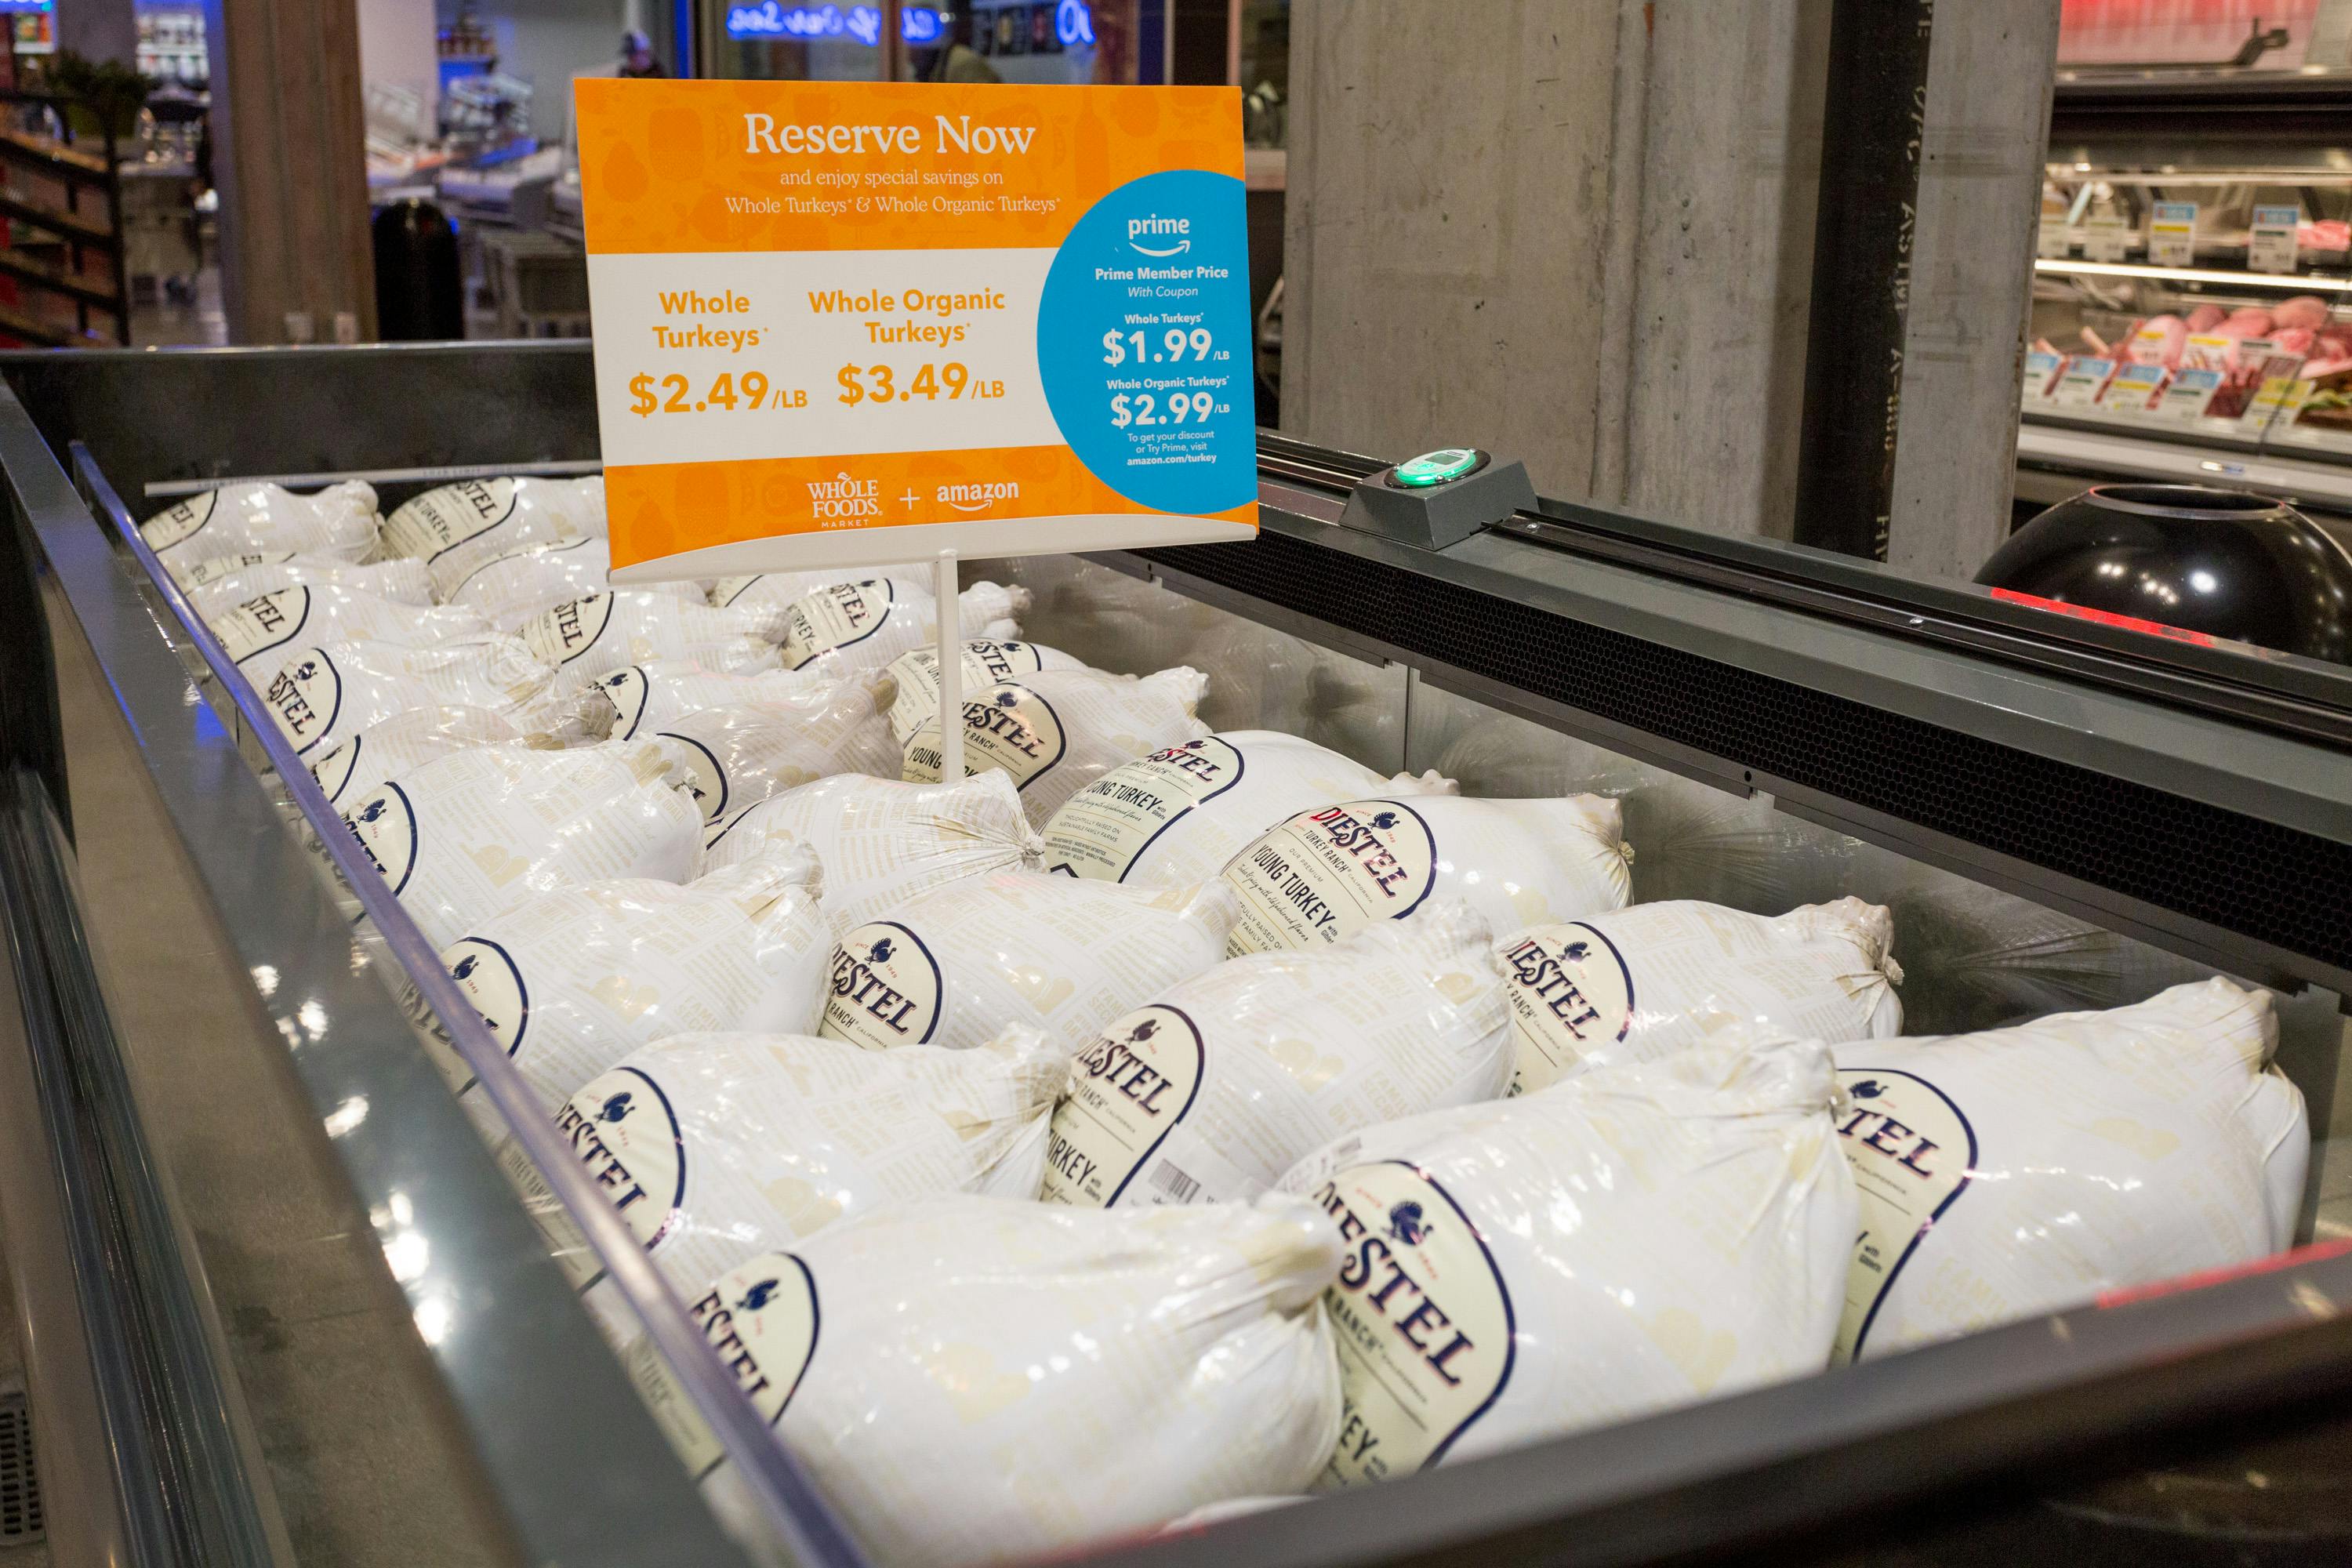 A freezer filled with frozen Turkeys at Whole Foods.